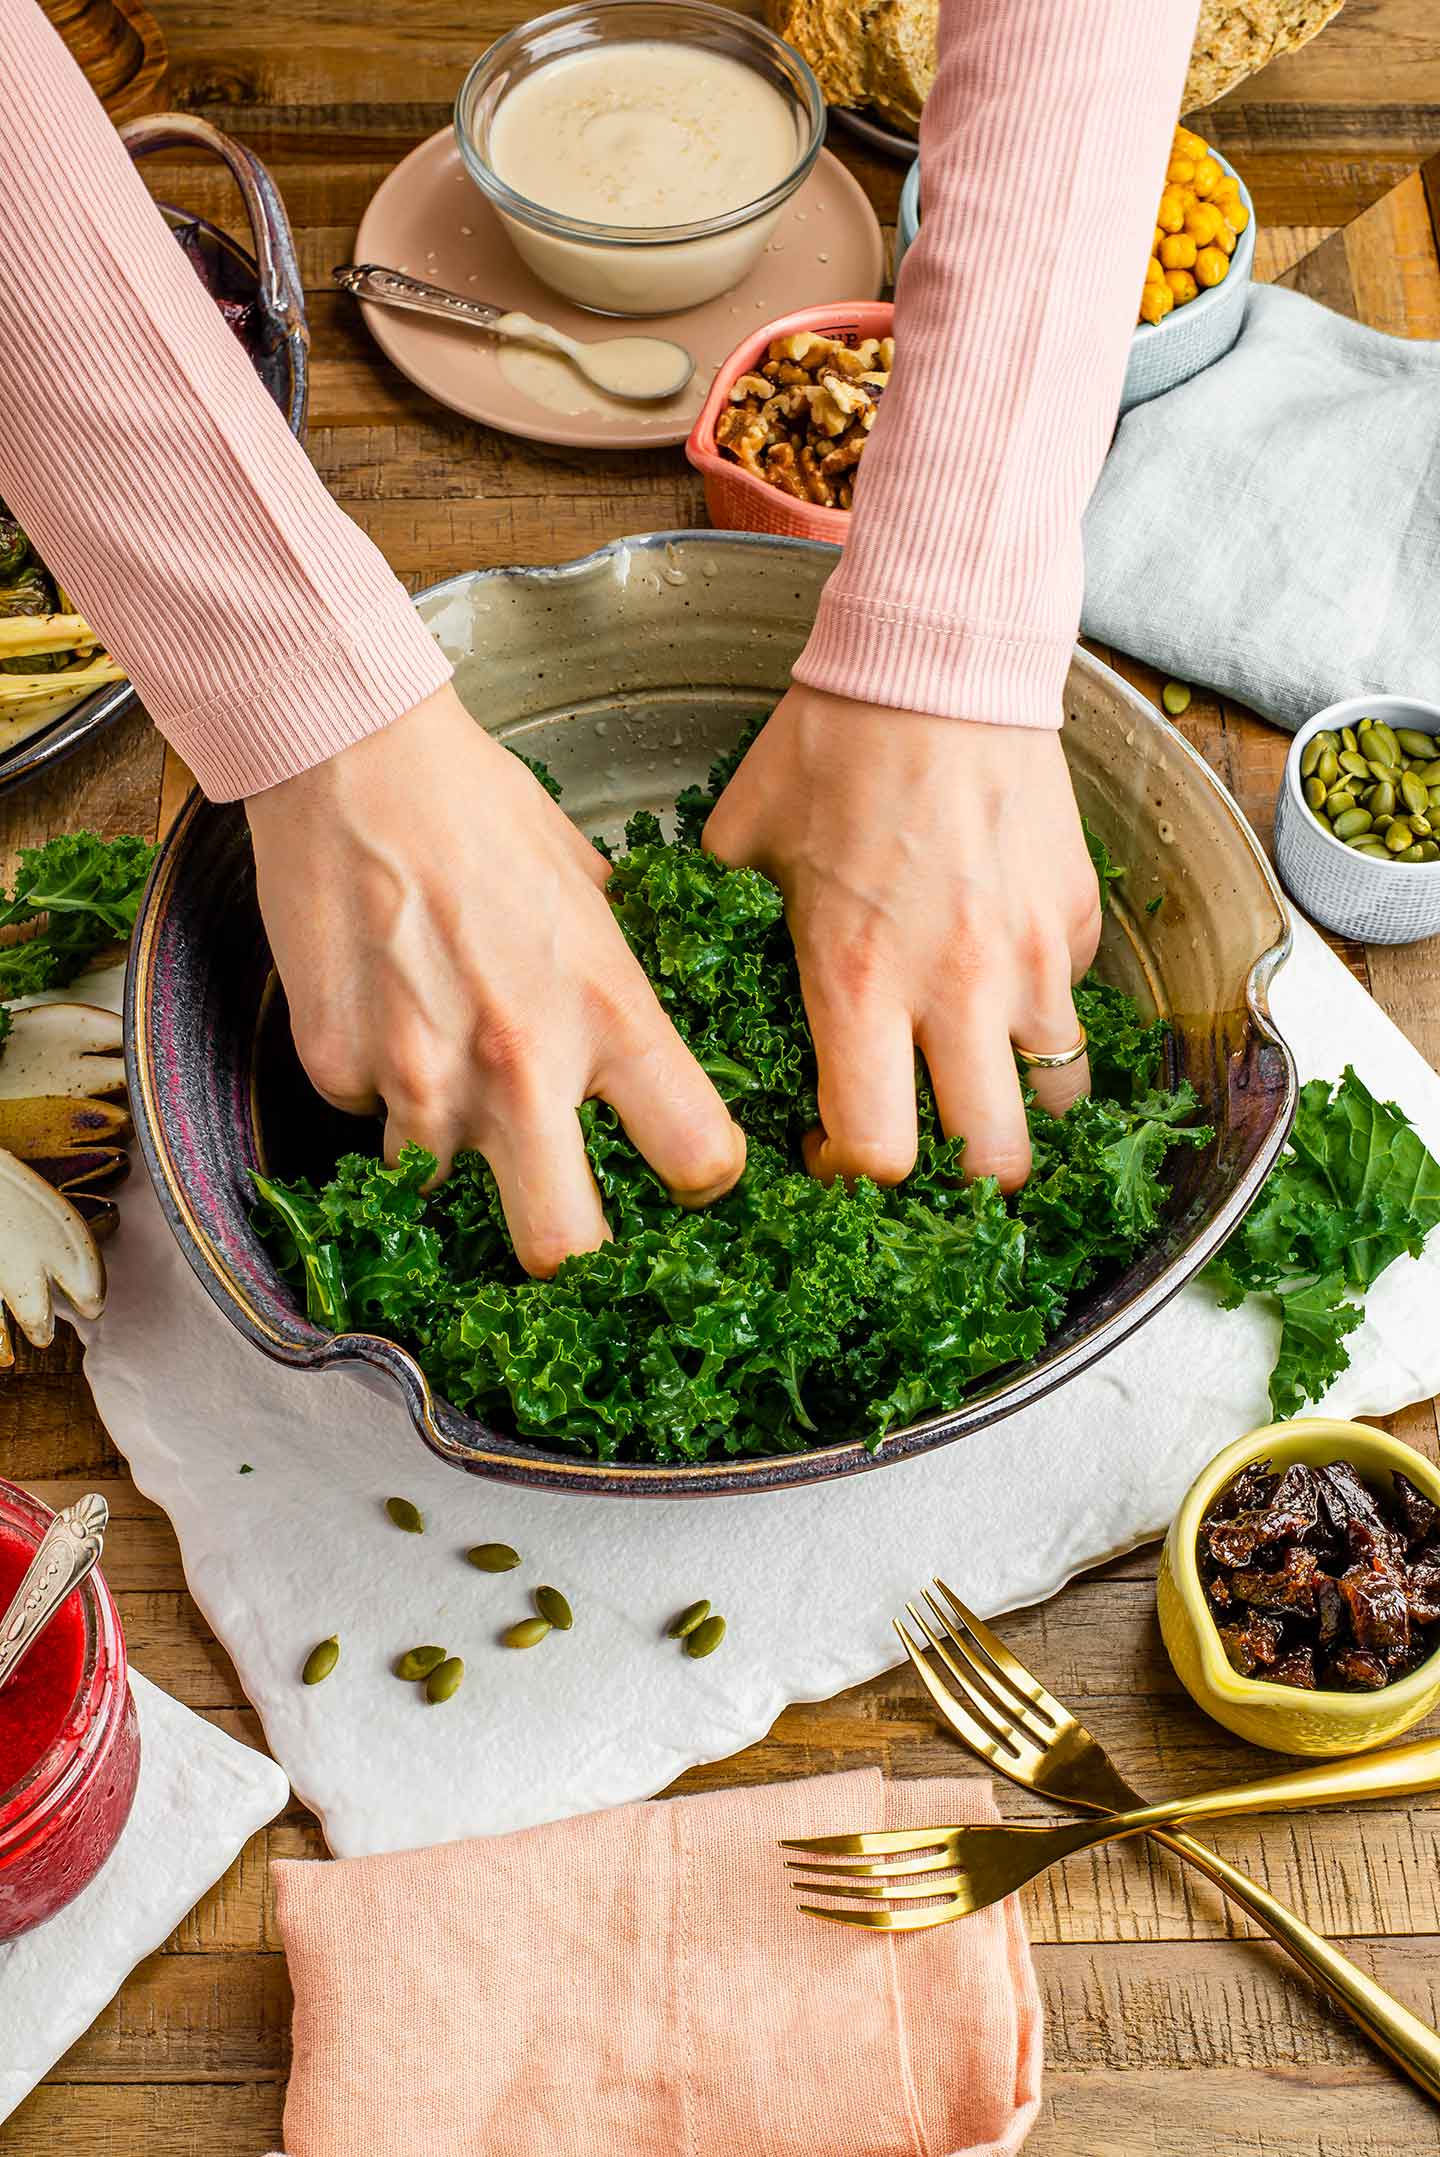 Top down view of two hands massaging a salad bowl full of kale.